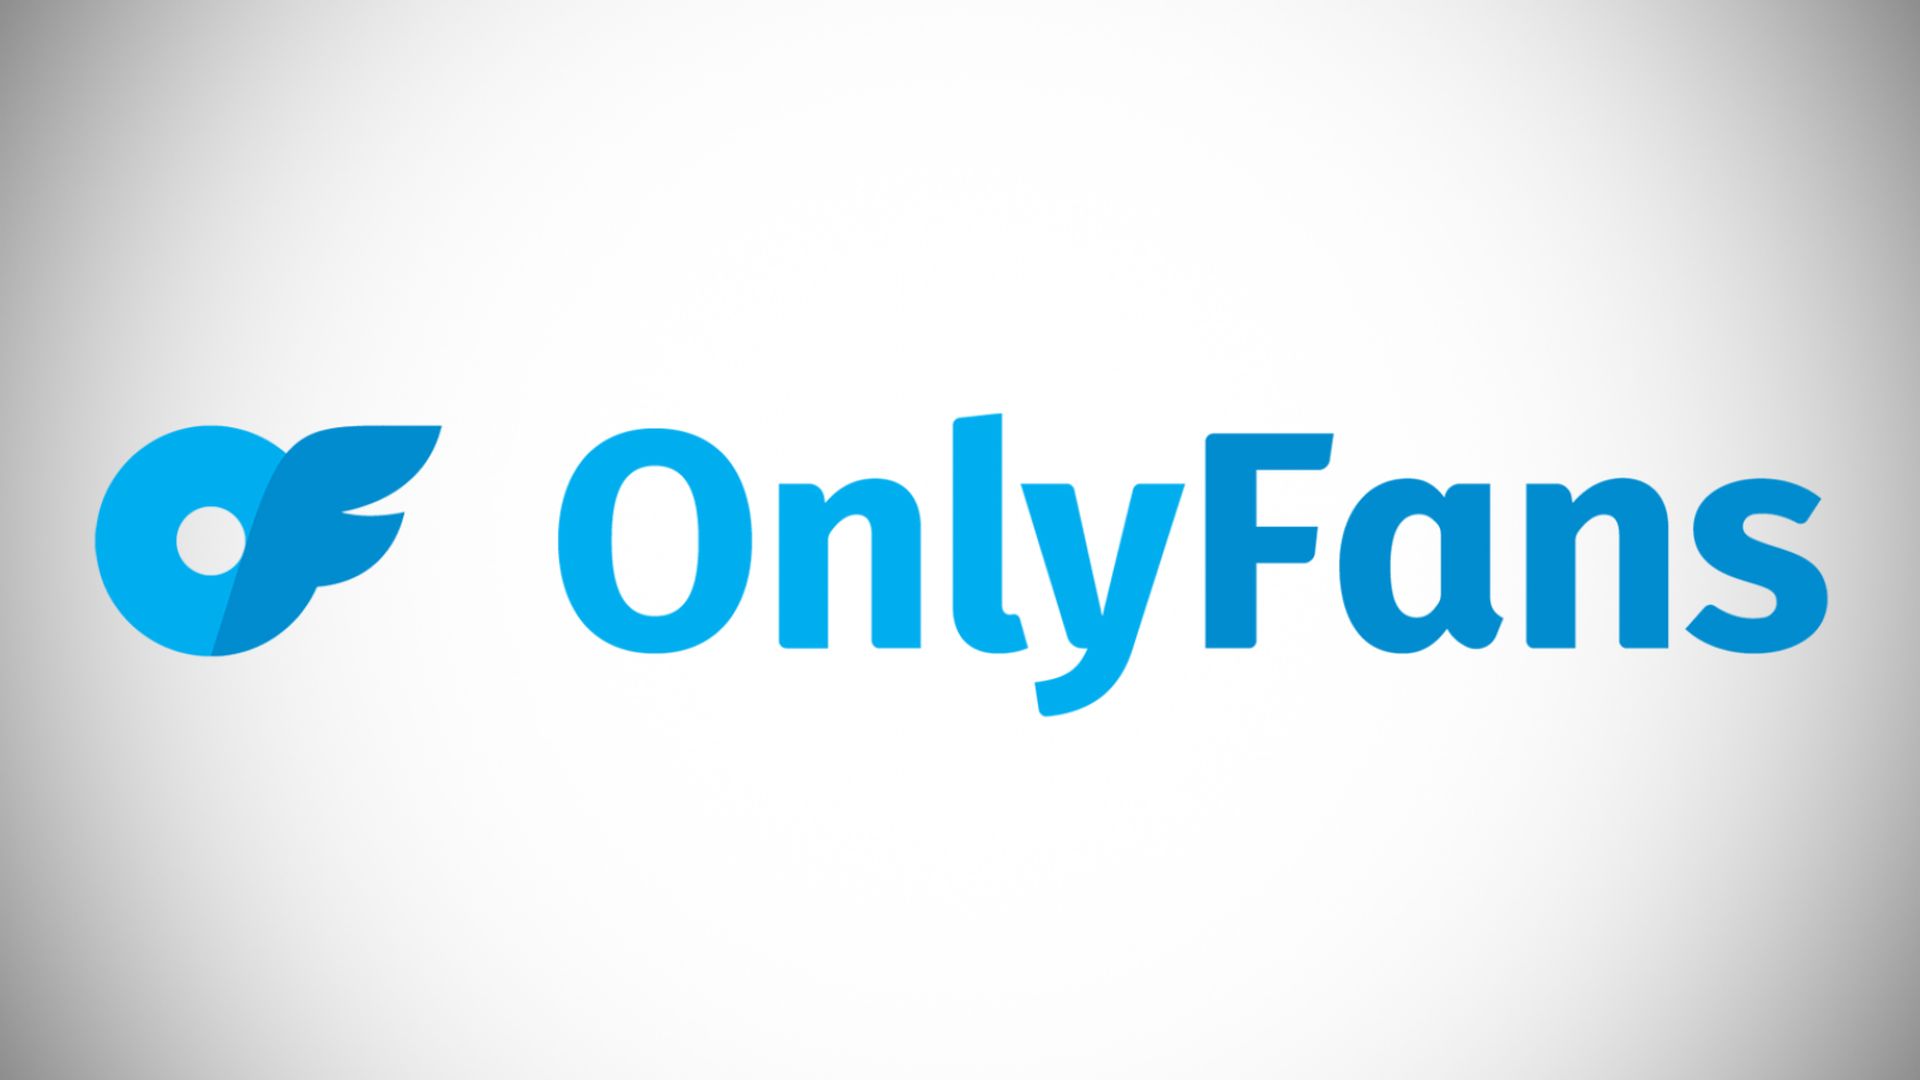 In this article, we are going to be covering how to find people on Onlyfans by location, e-mail, name, social media, interest, and username.